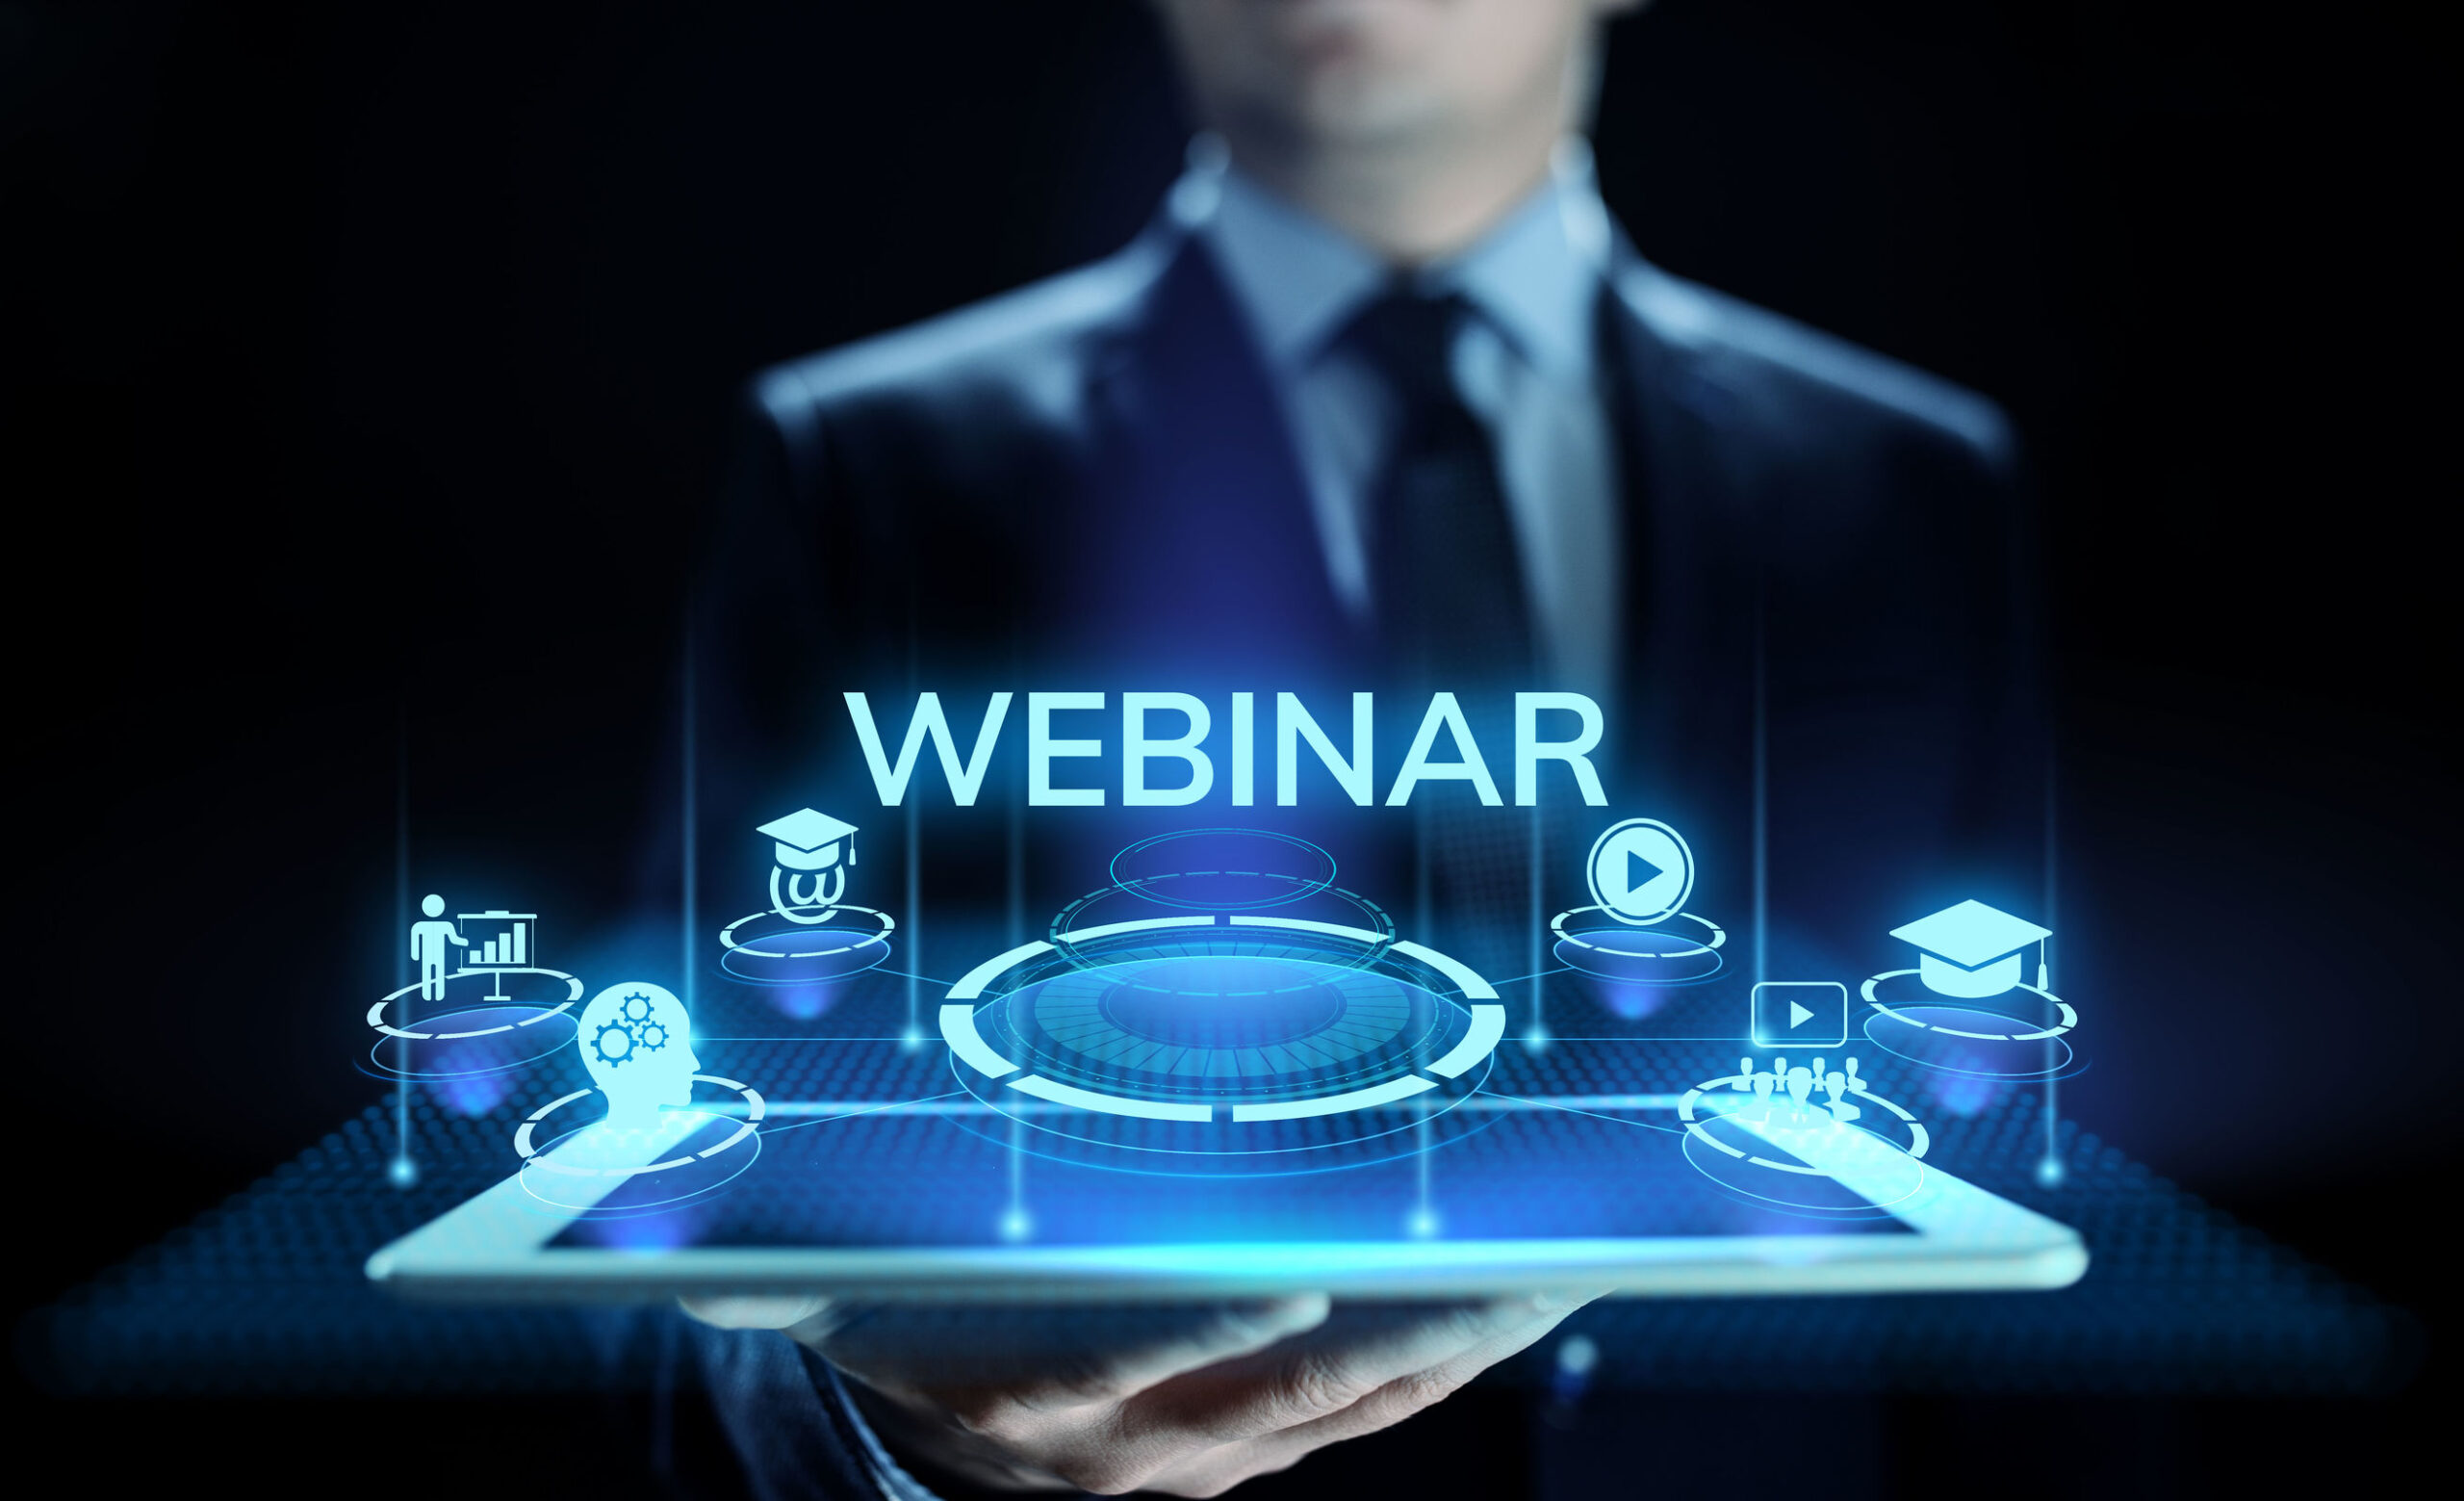 Discover What aACE Can Do for Your Business in Our September Webinars